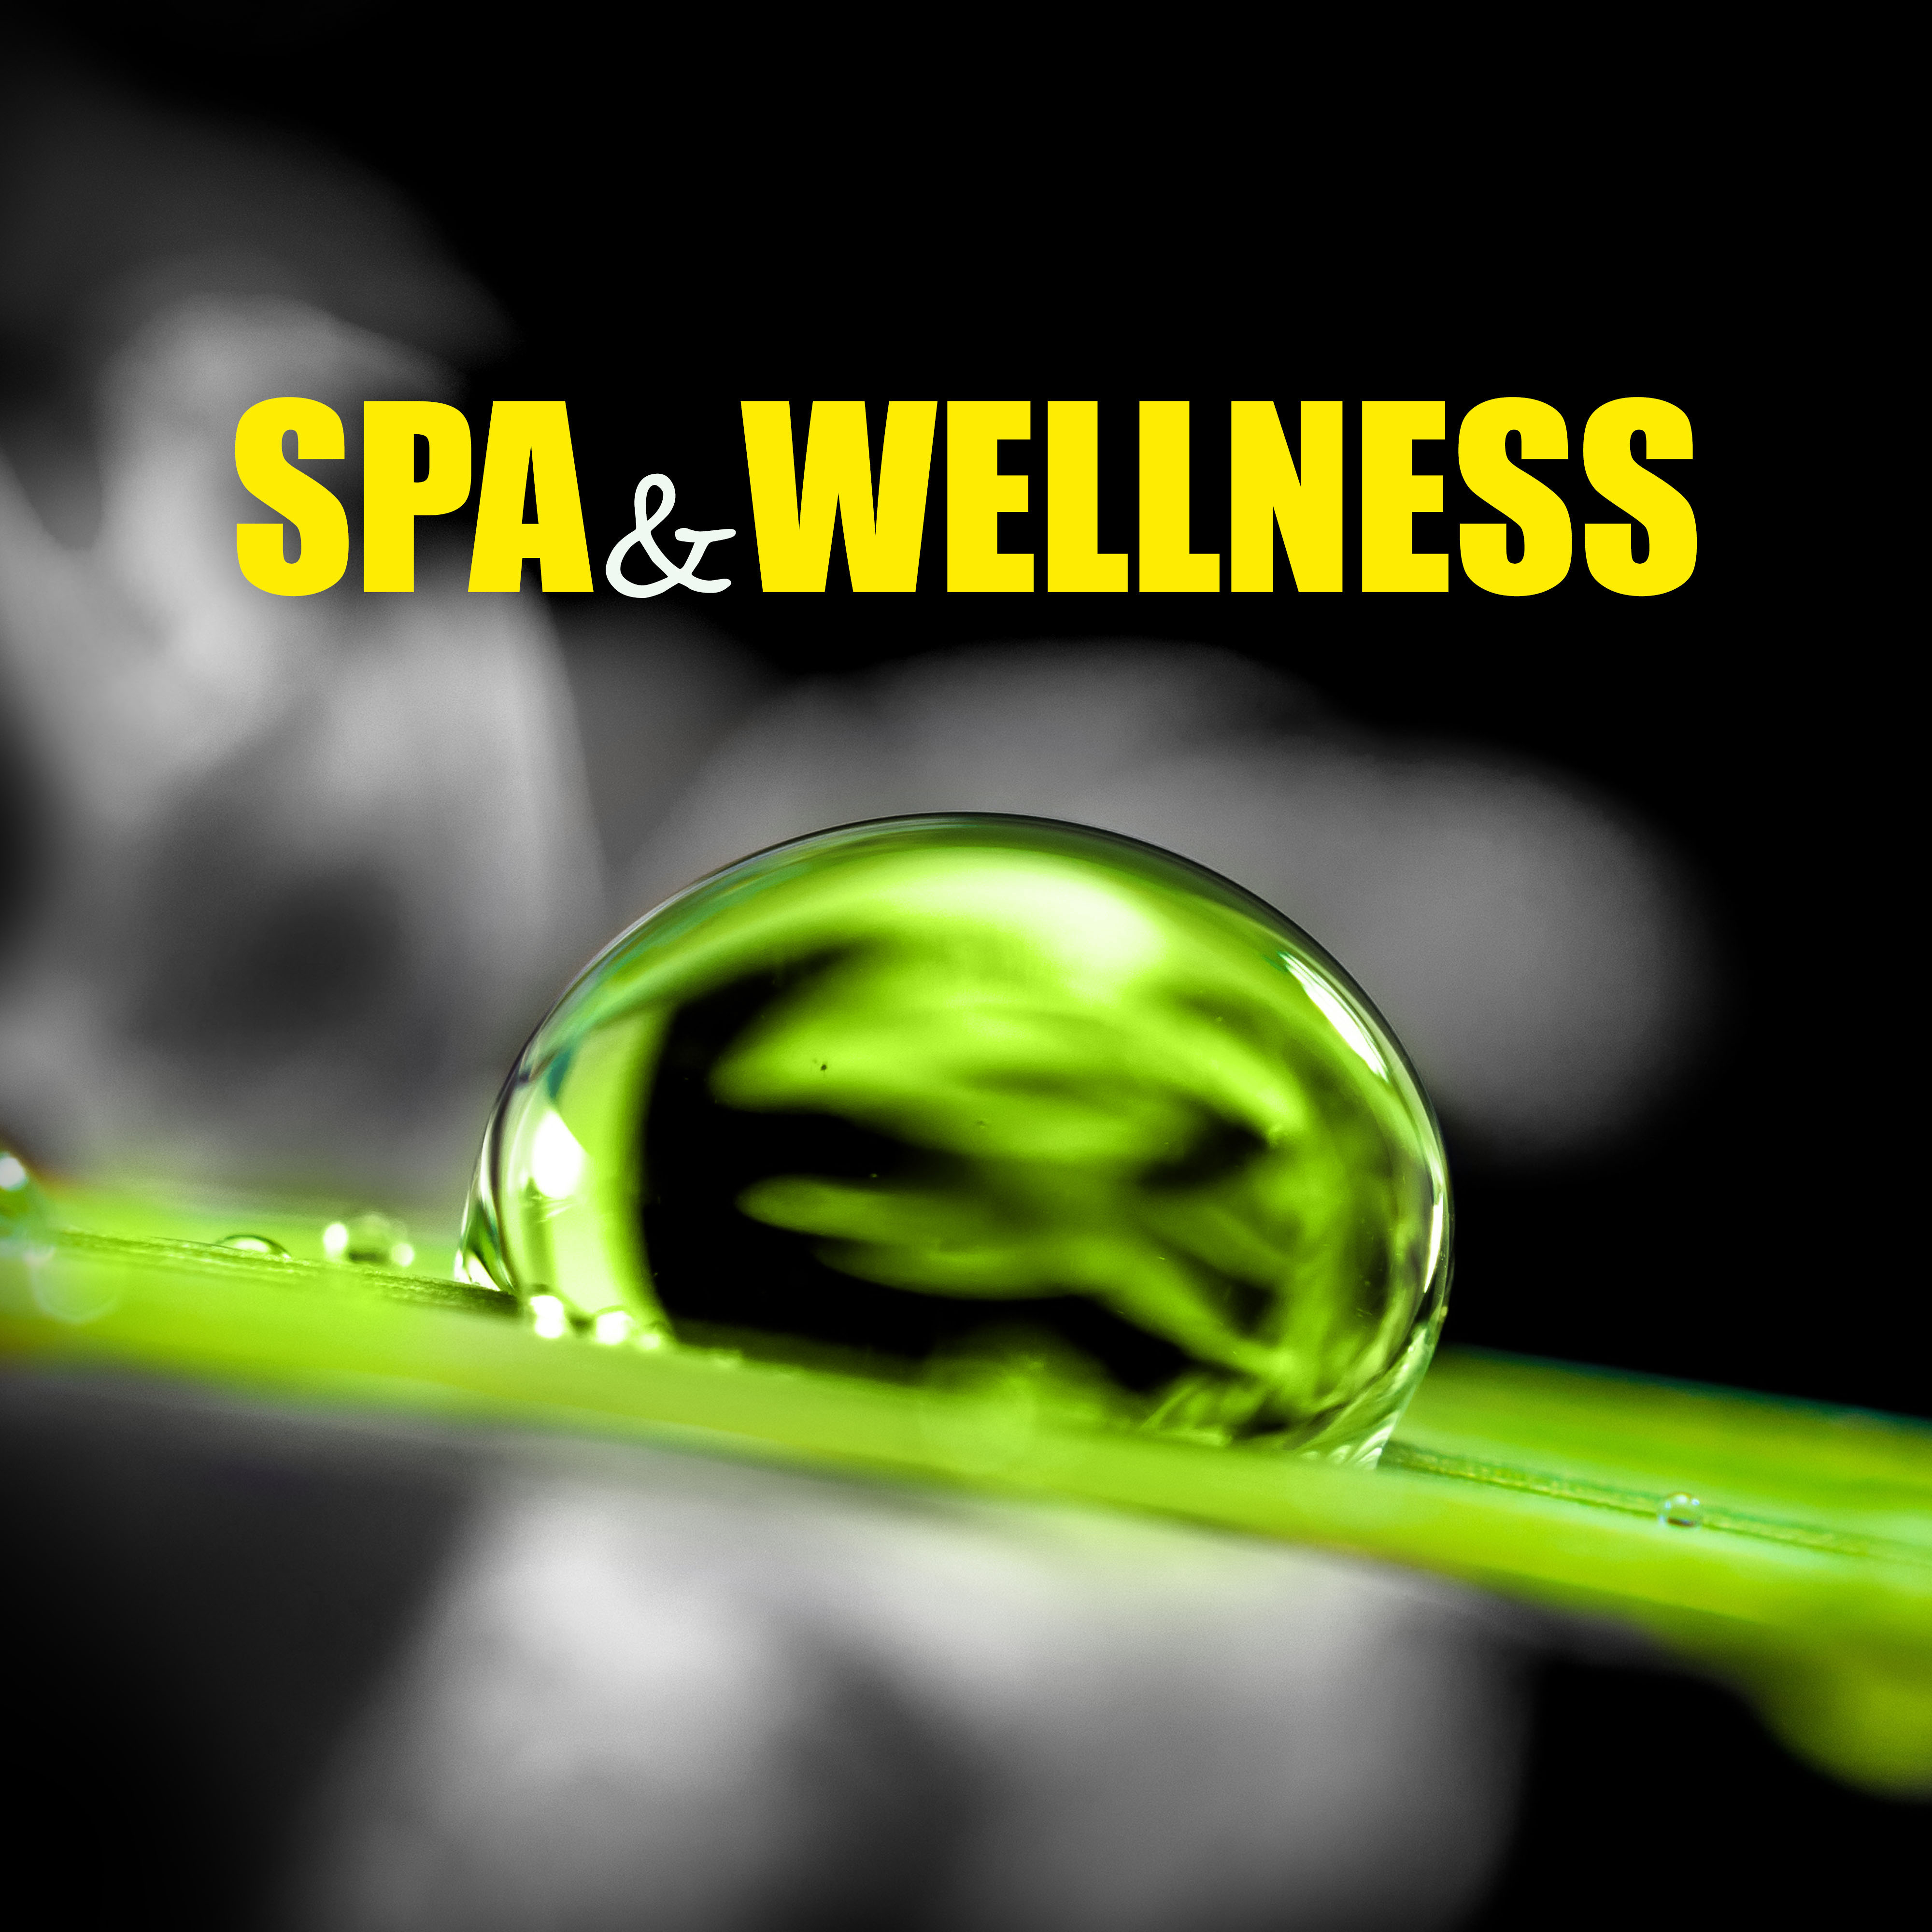 Spa&Wellness - Sound Therapy, Music for Relaxation, Calm Music for Meditation, Sounds of Nature, Relaxing Spa Music, Massage Music